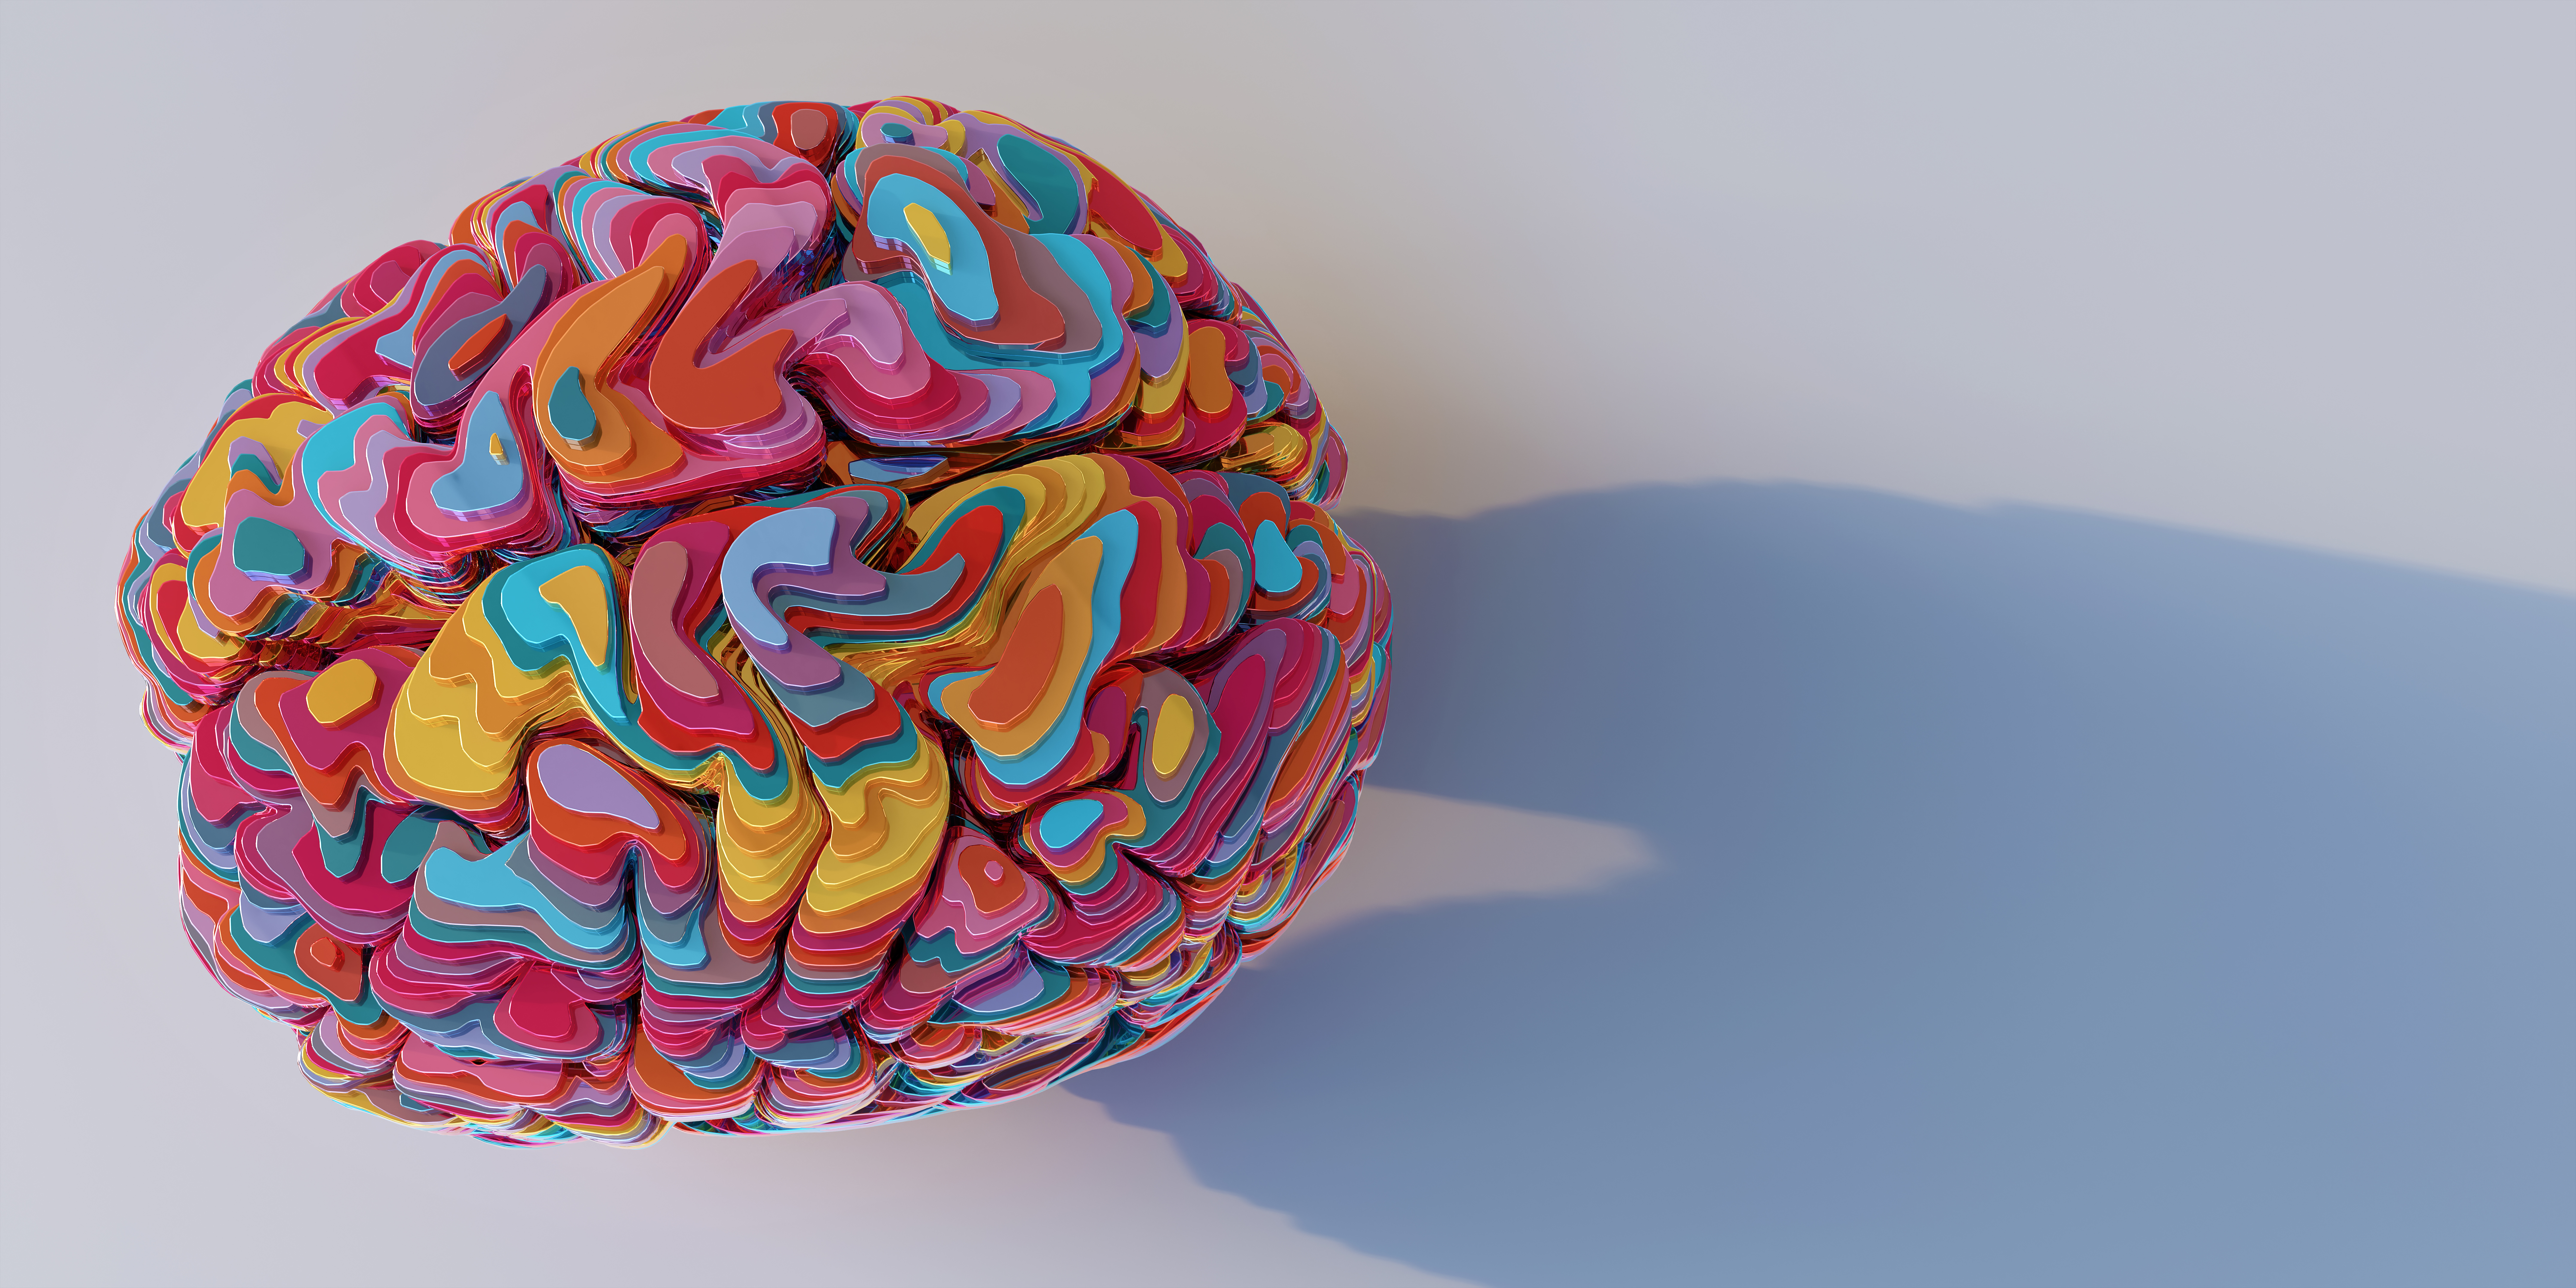 Graphic image of a human brain resting on a surface. Each section of the brain is a shown in a different colour, giving a multi-colour to it as a whole.